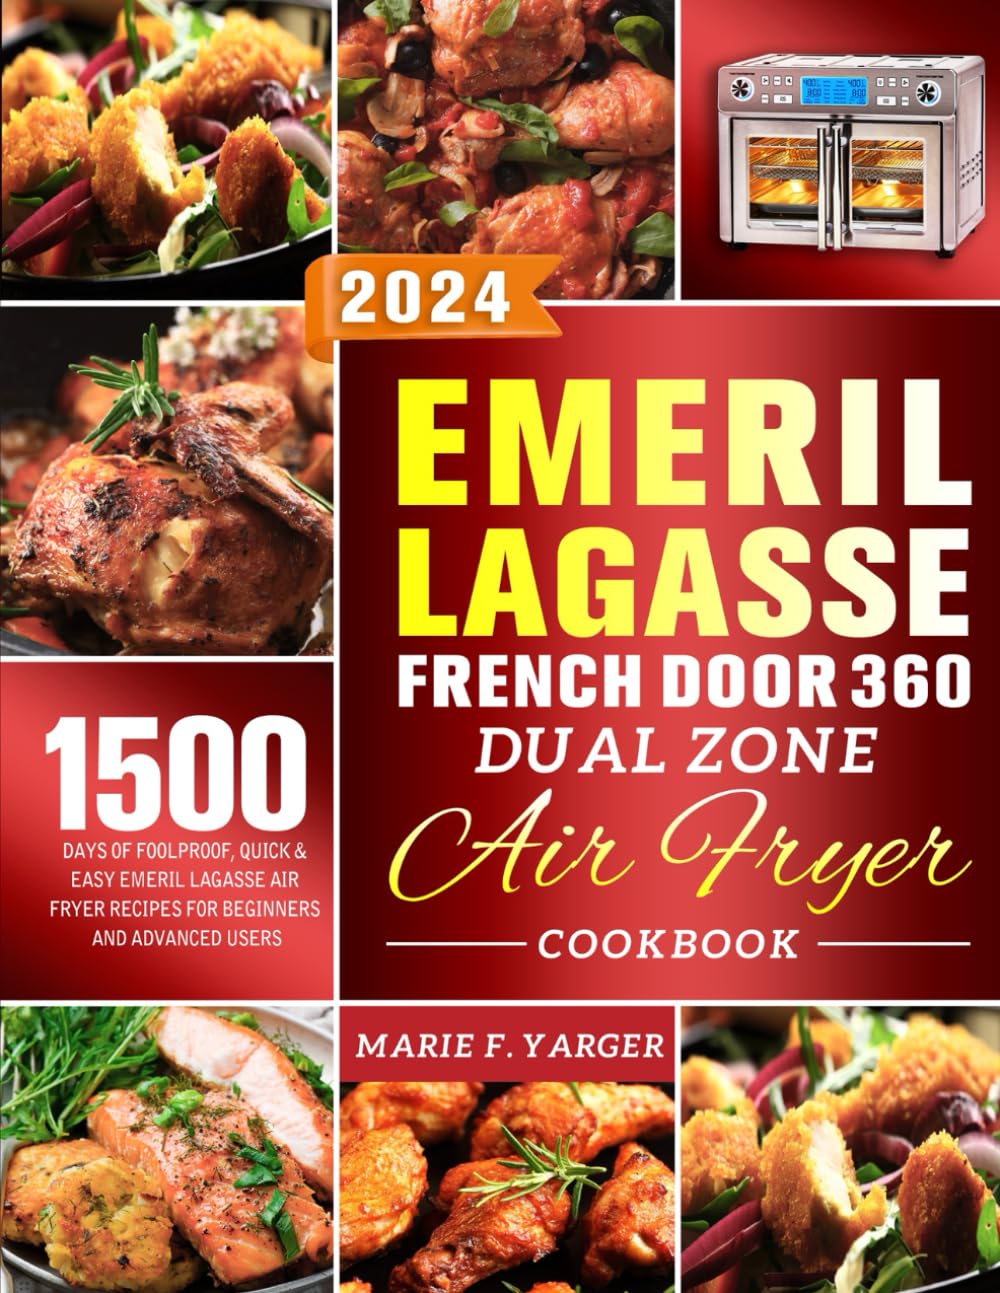 Emeril Lagasse French Door 360 Dual Zone Air Fryer Cookbook: 1500 Days of Foolproof, Quick & Easy Emeril Lagasse Air Fryer Recipes for Beginners and Advanced Users